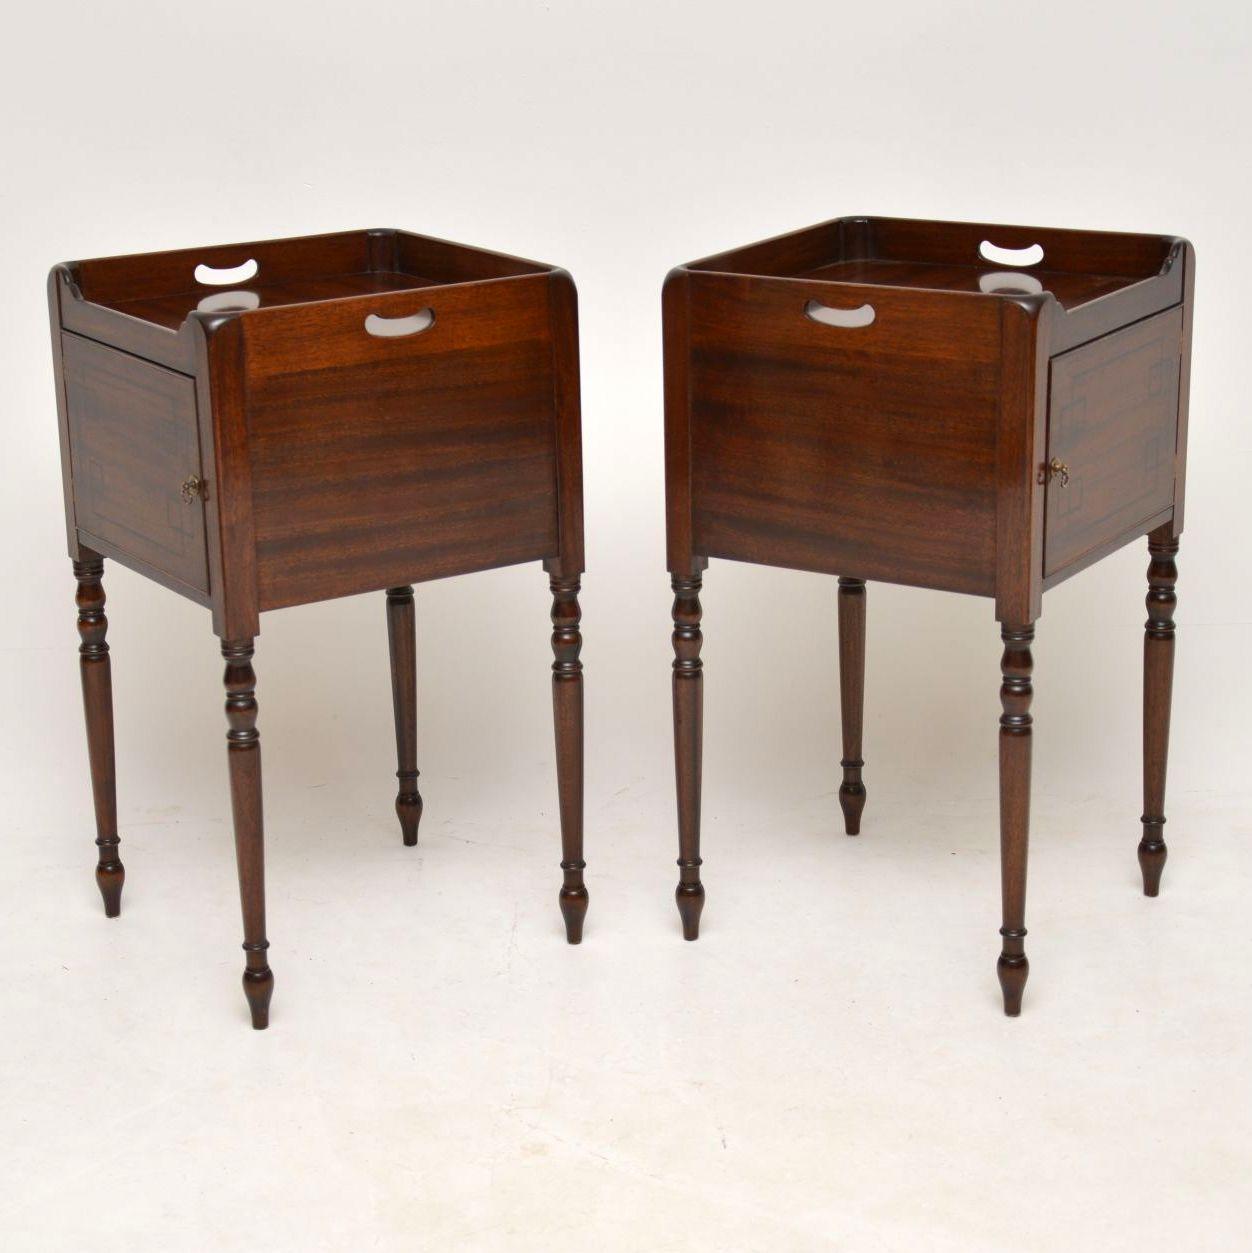 Mid-20th Century Pair of Antique Inlaid Mahogany Bedside Cabinets